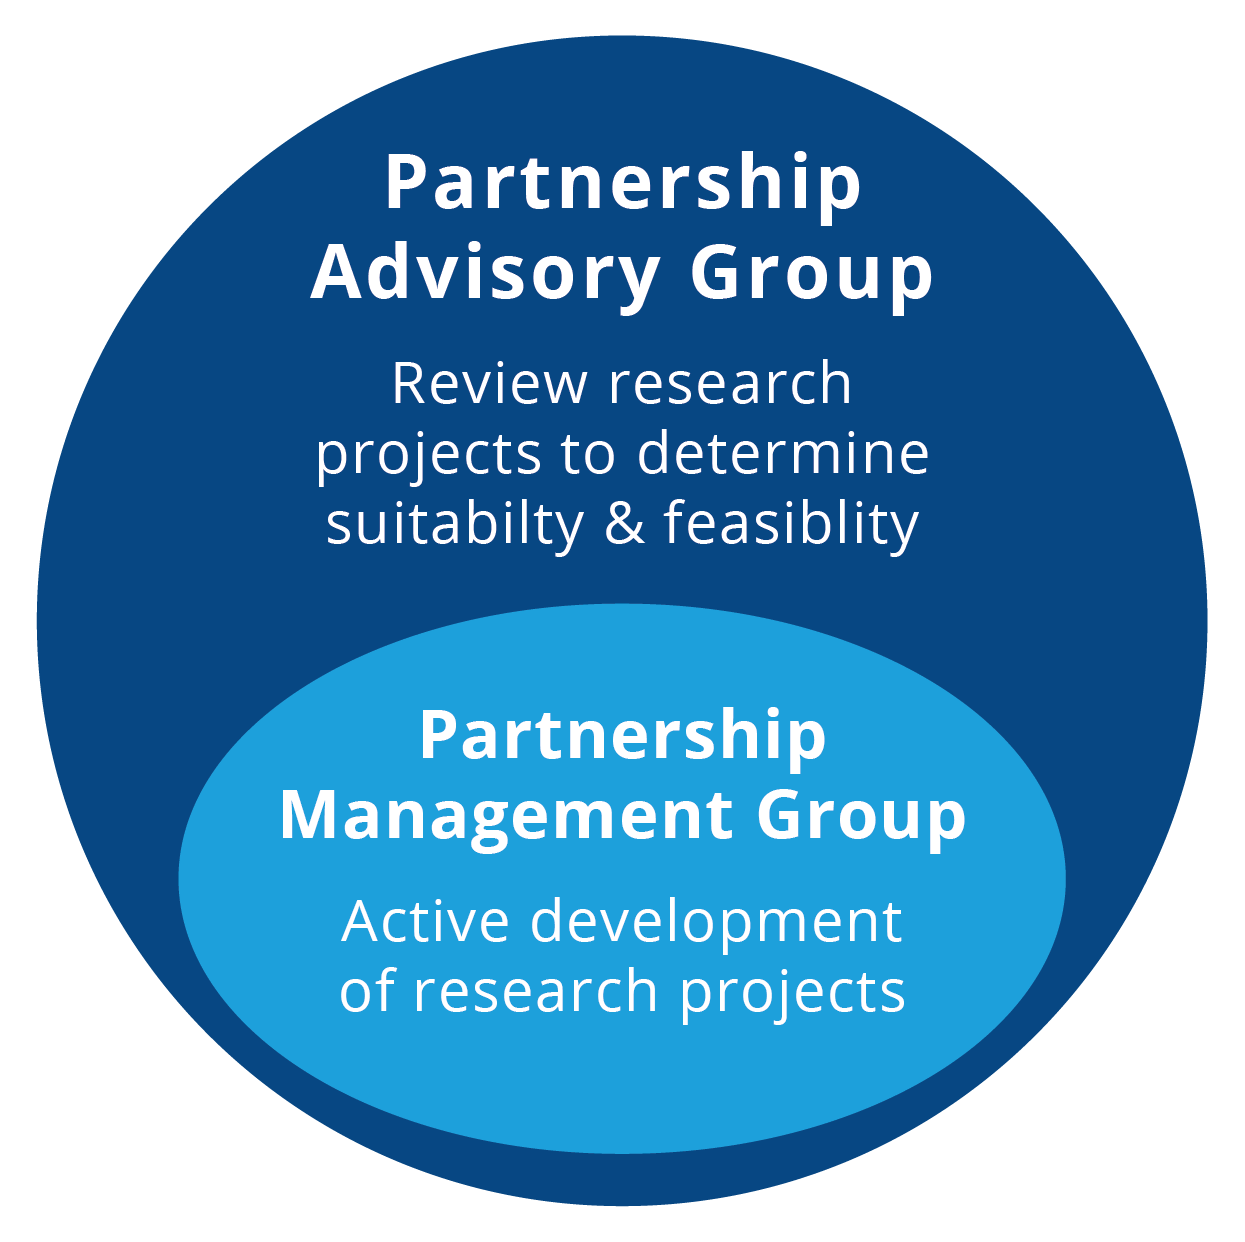 A circular graphic showing the relationship between the Partnership Advisory Group and the Partnership Management Group, as described in the text.